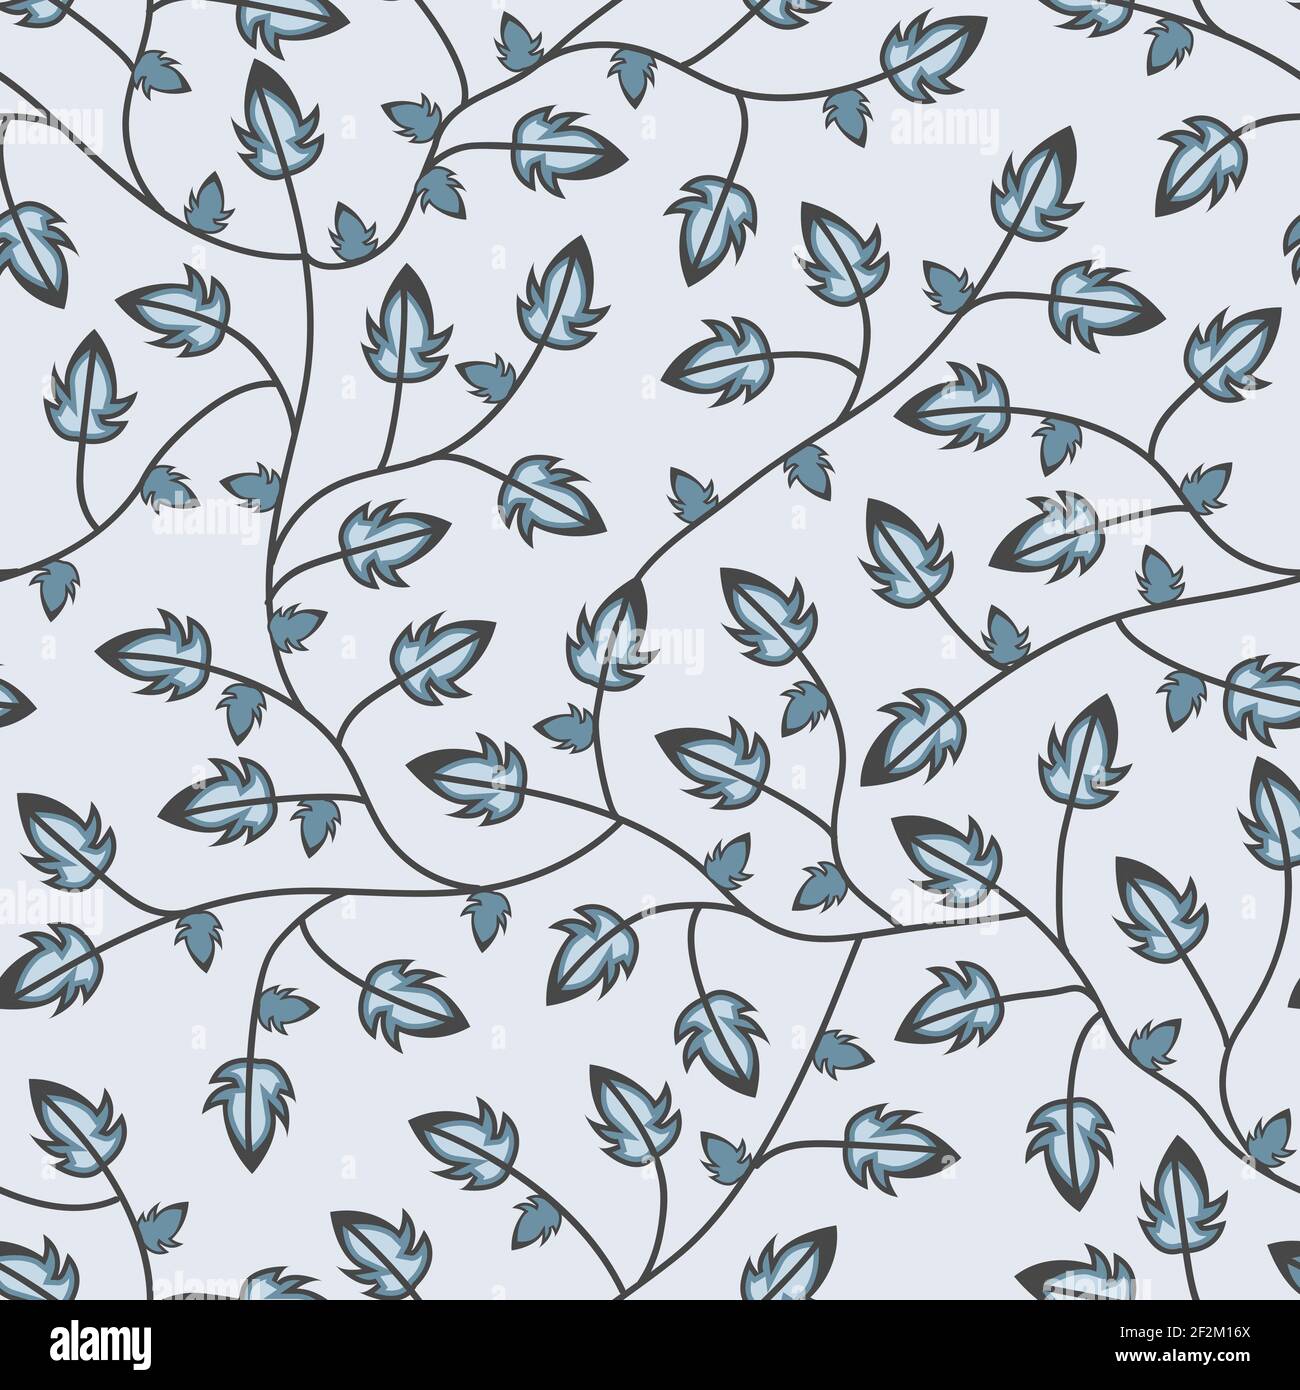 Five cornered Leaves branches seamless pattern Stock Vector